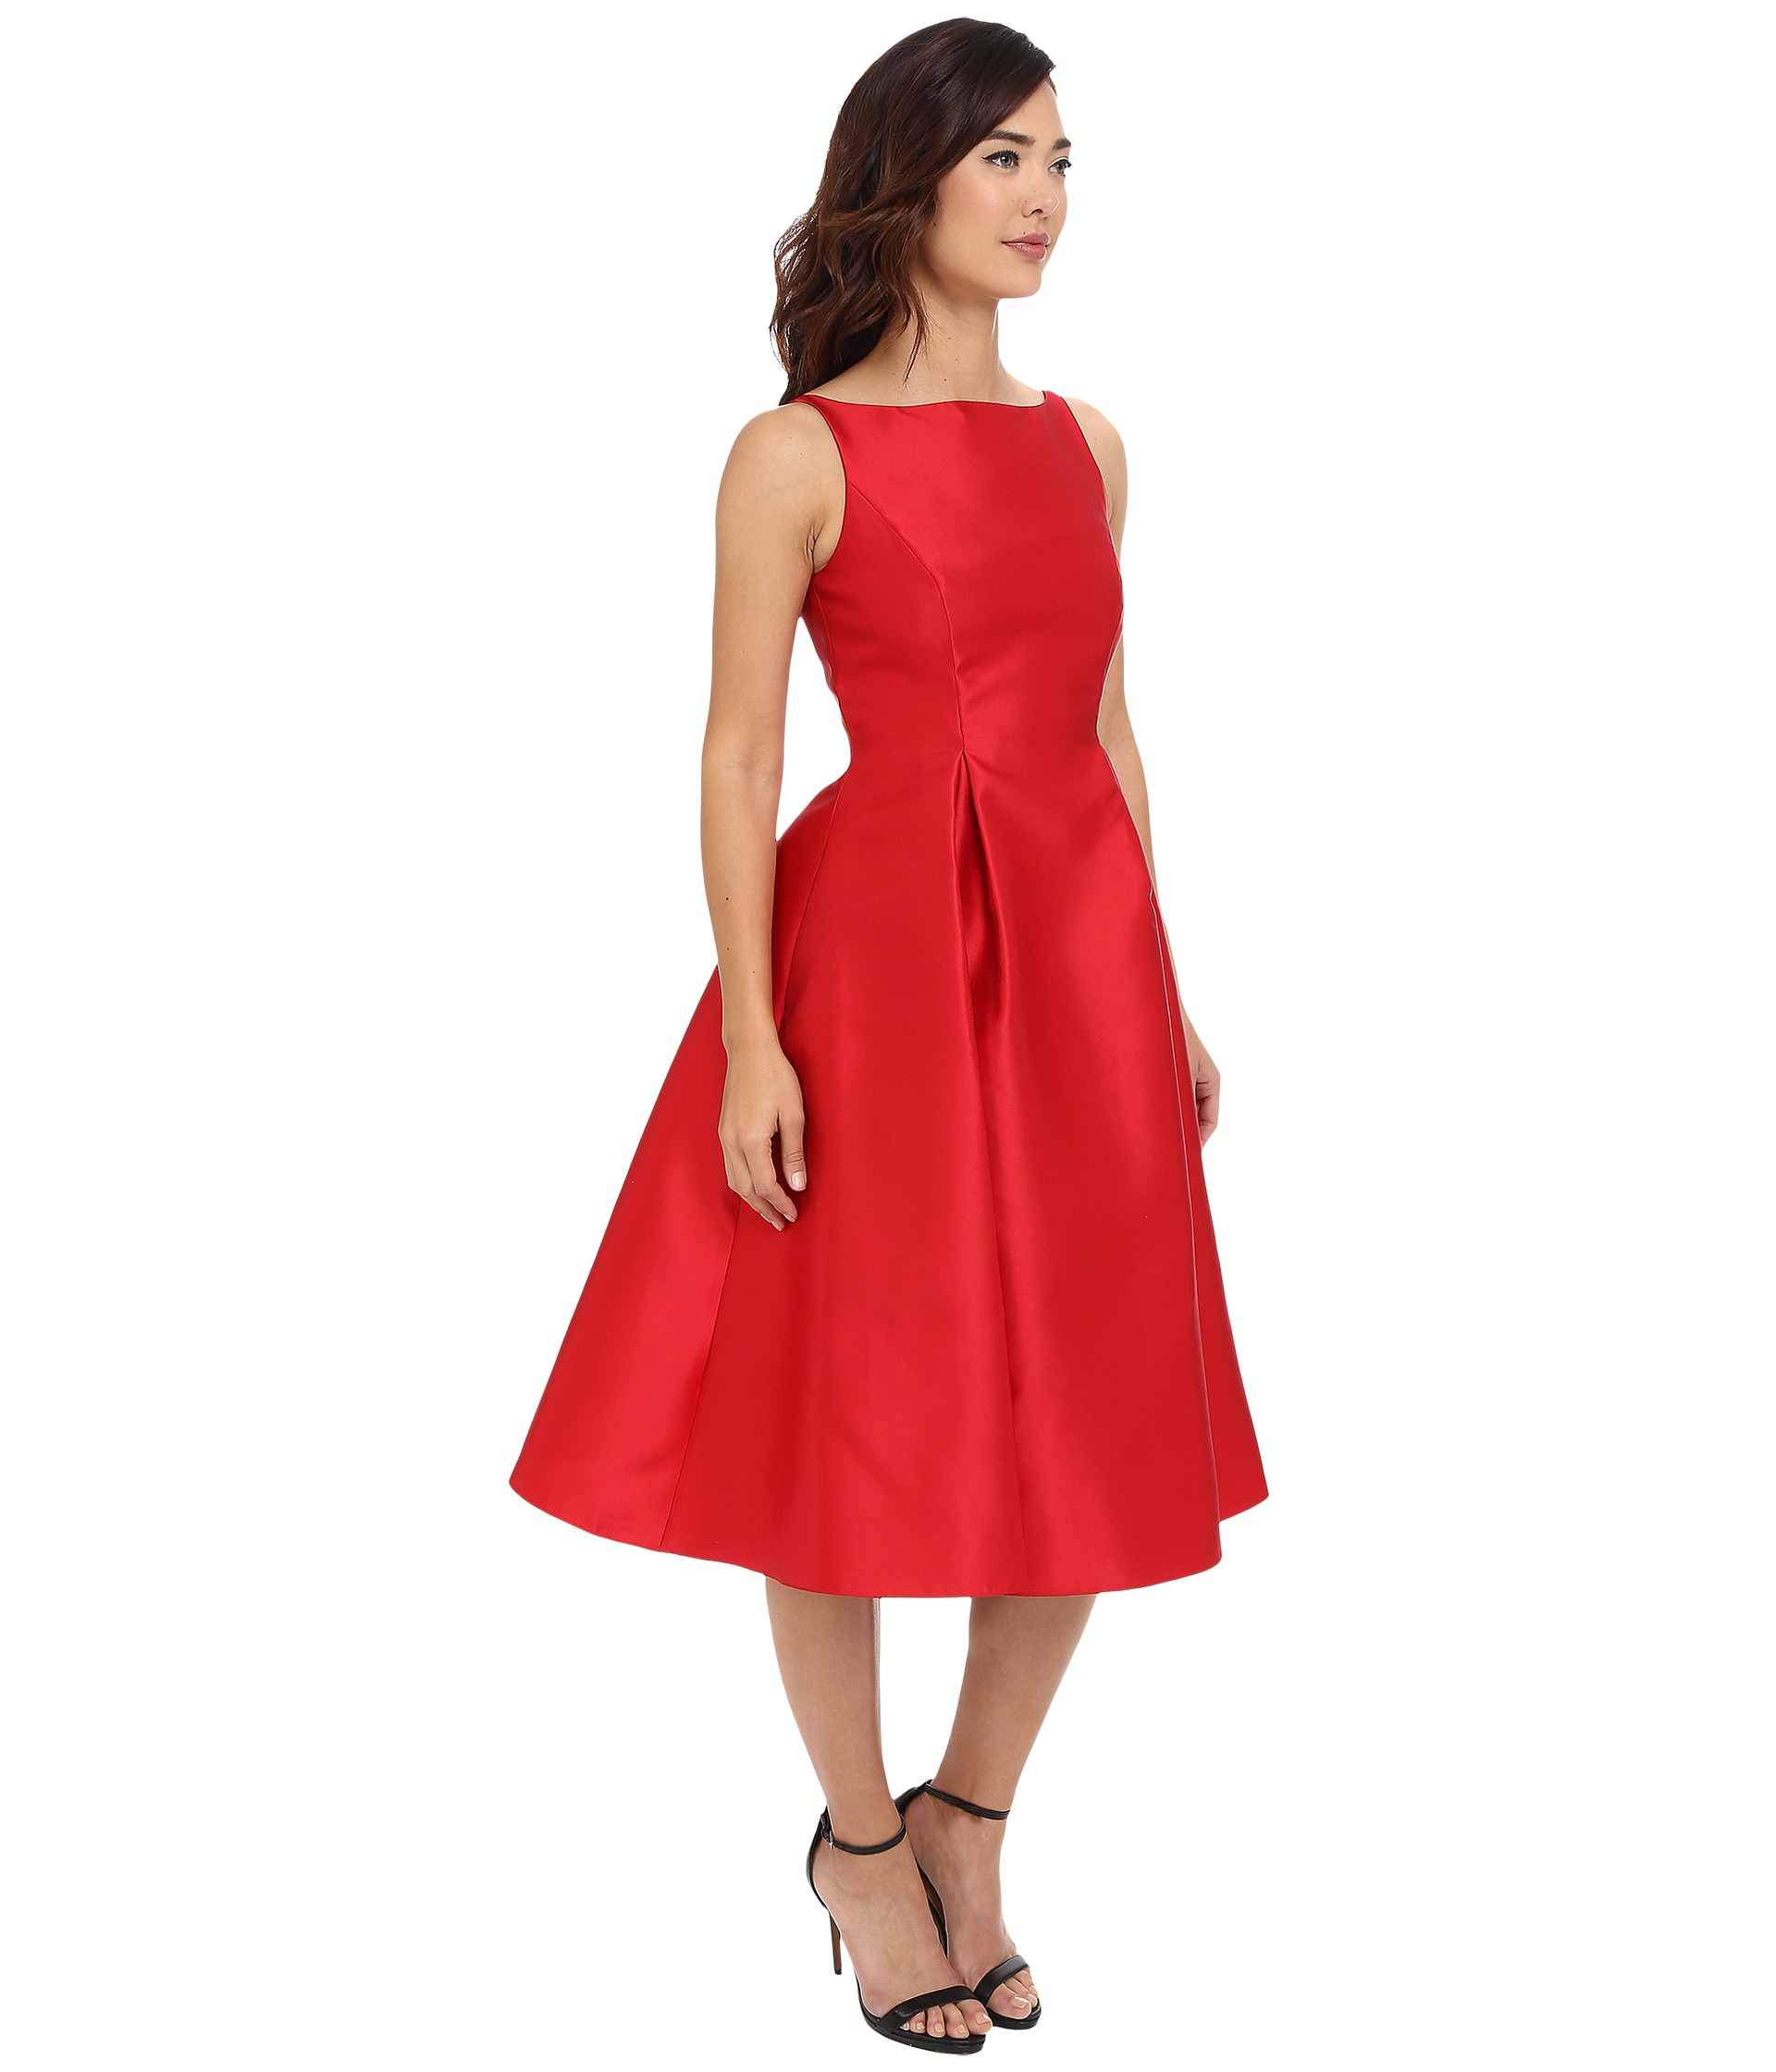 Adrianna Papell Red Dresses Outlet Shop ...